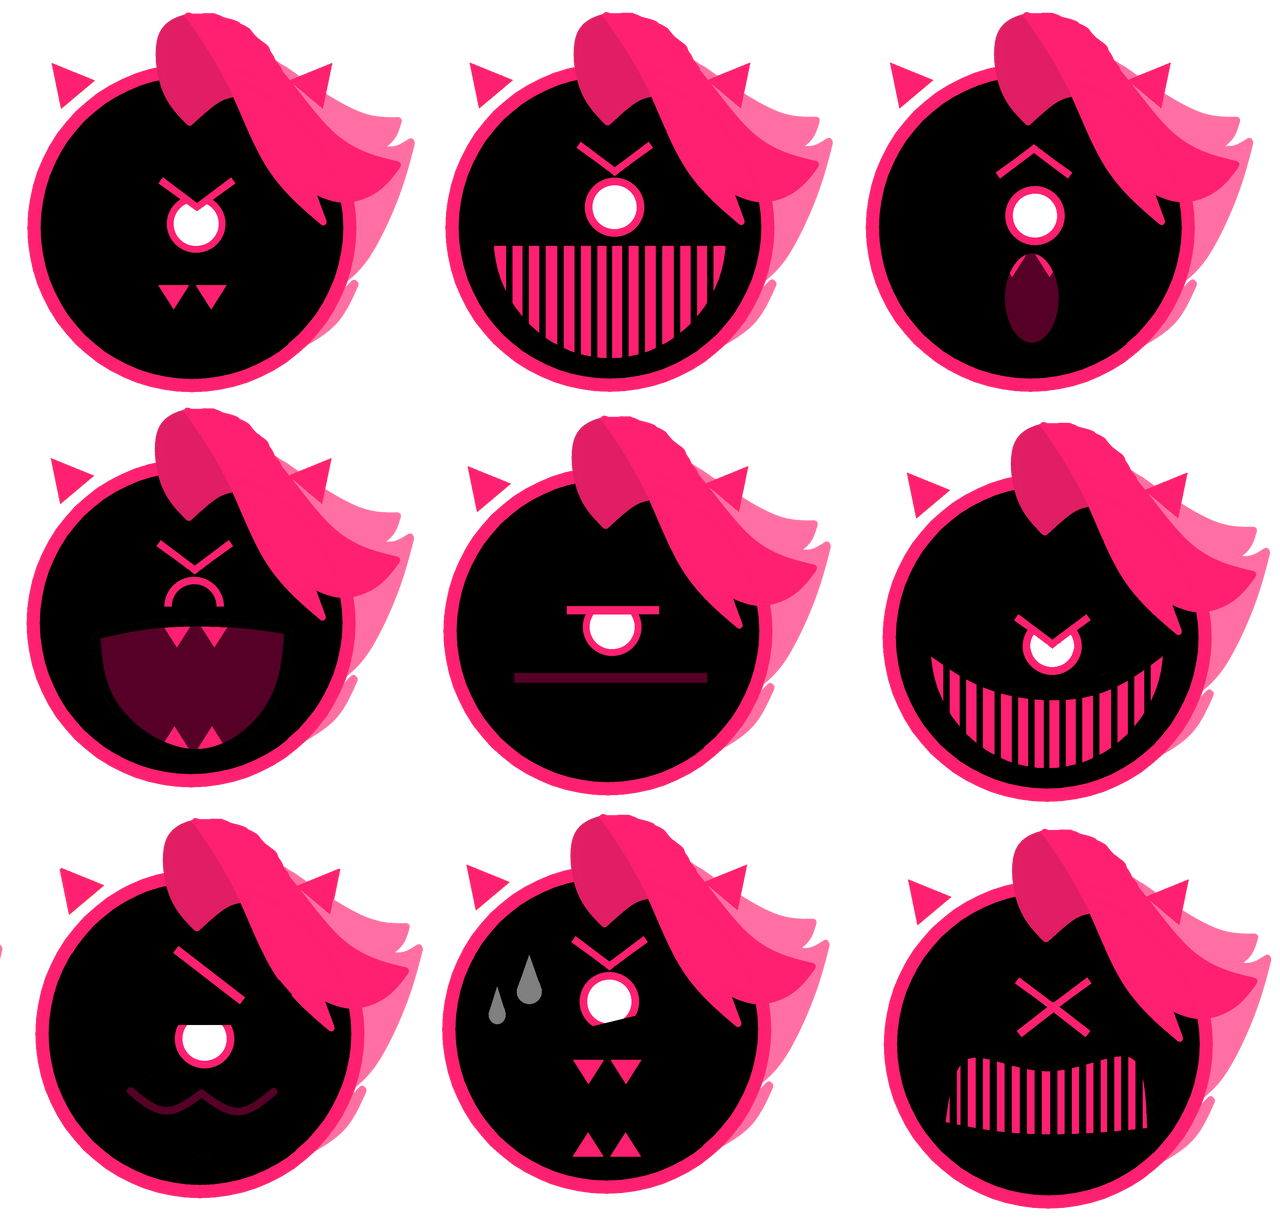 JSAB The Musical - Boss Dub Expressions by BARRYDUCTIONS on DeviantArt